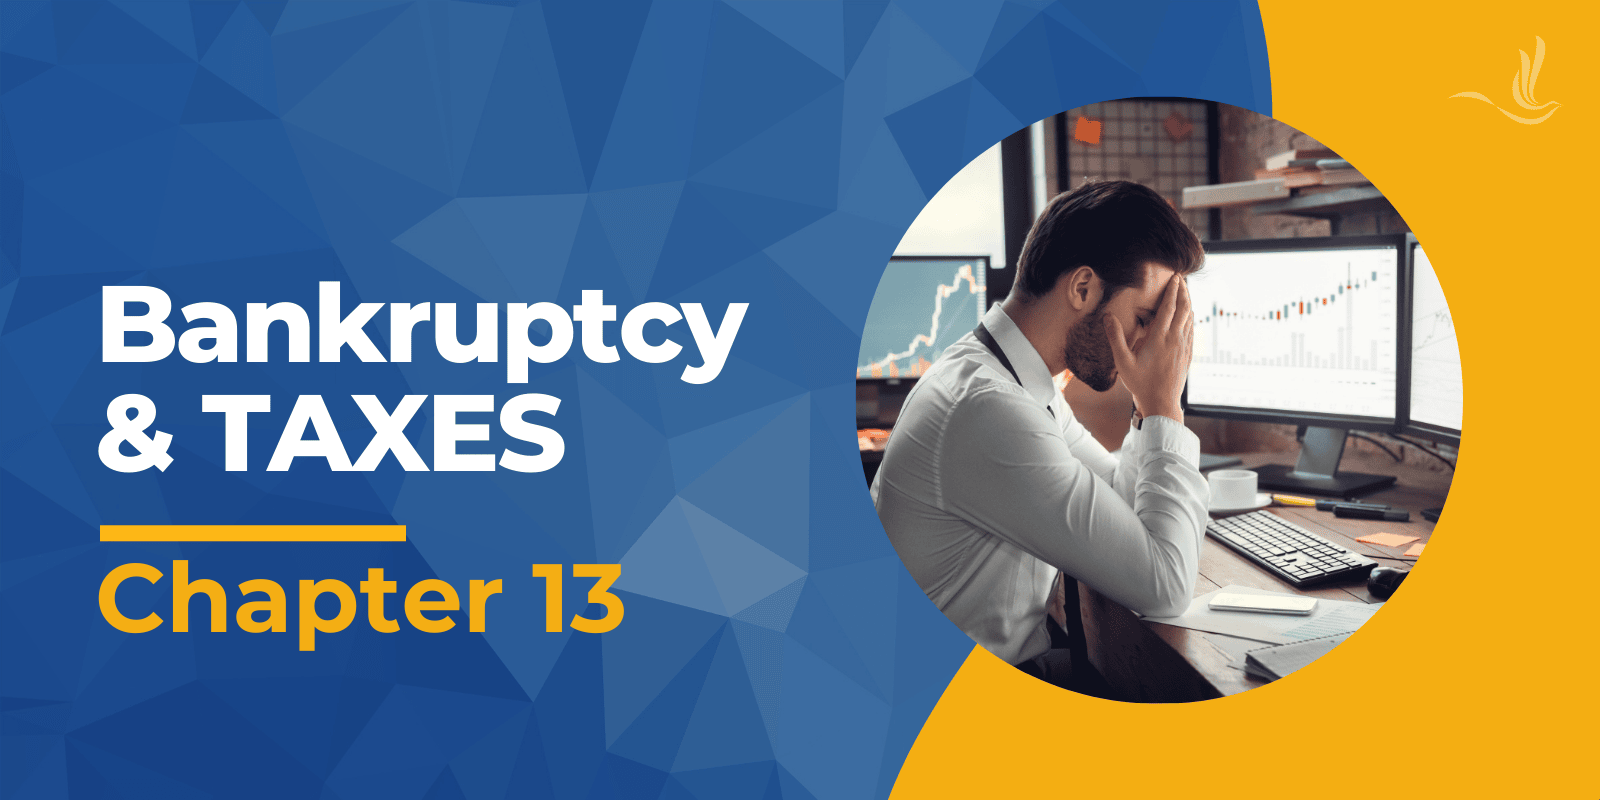 chapter 13 bankruptcy and taxes